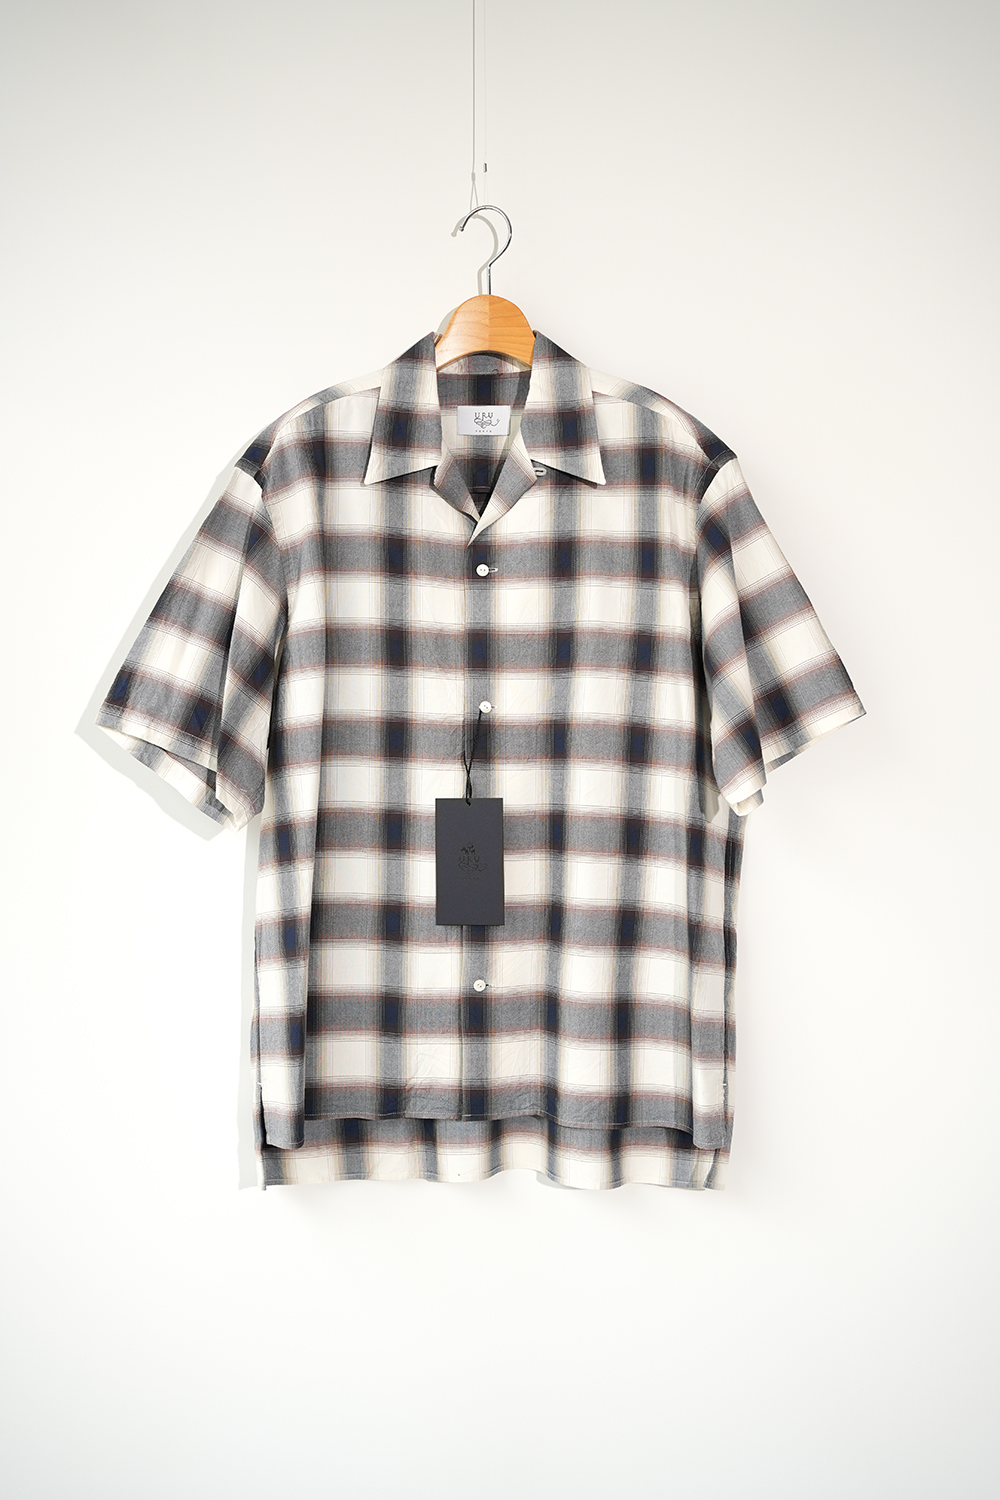 COTTON MADAL OPEN COLLAR S/S SHIRTS